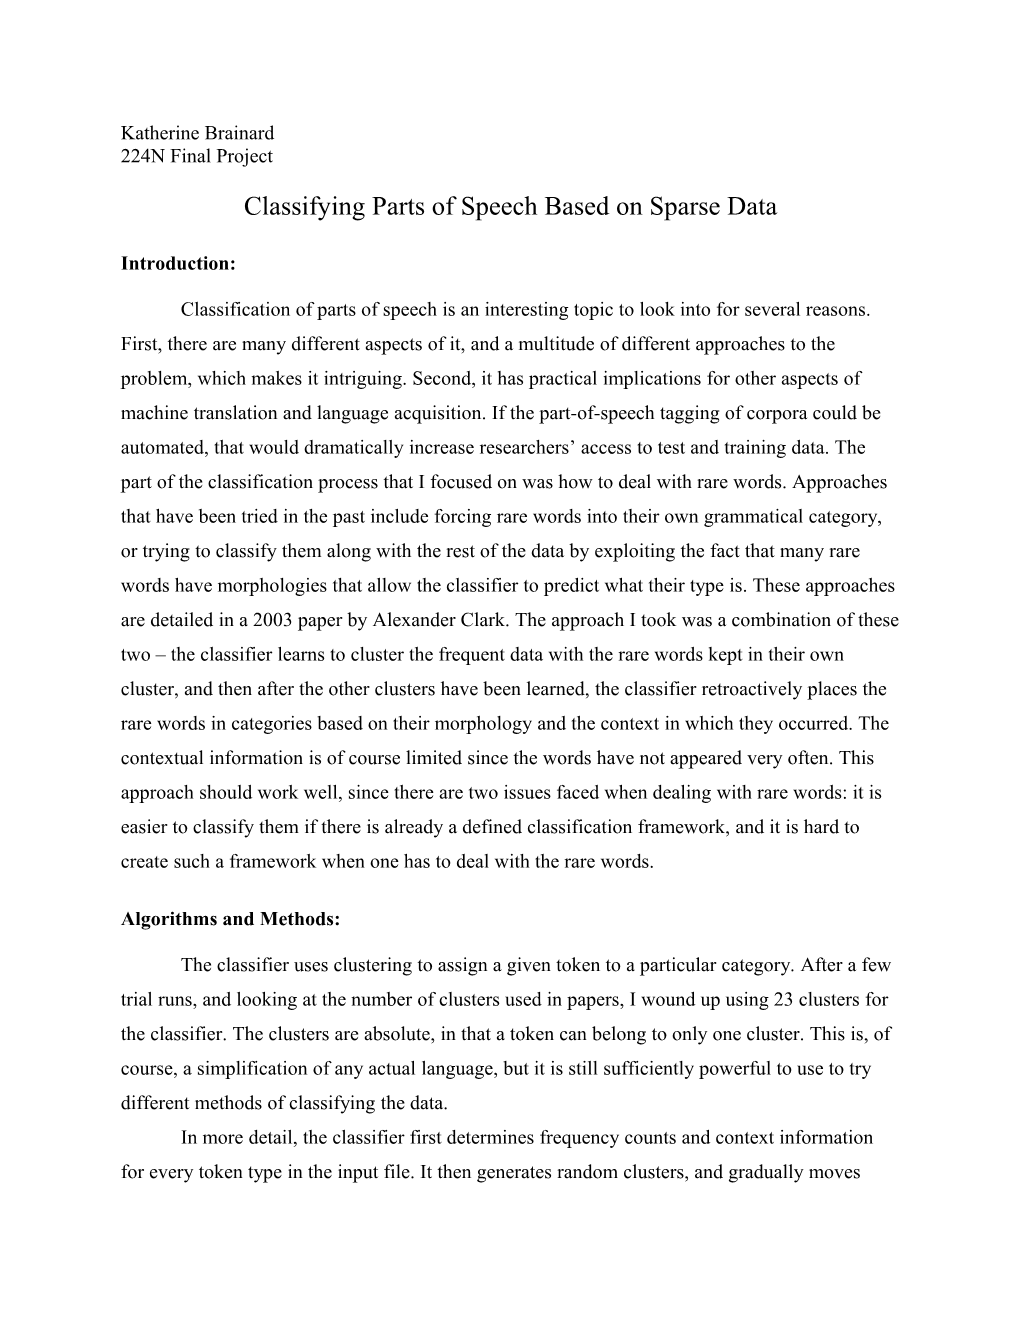 Classifying Parts of Speech Based on Sparse Data